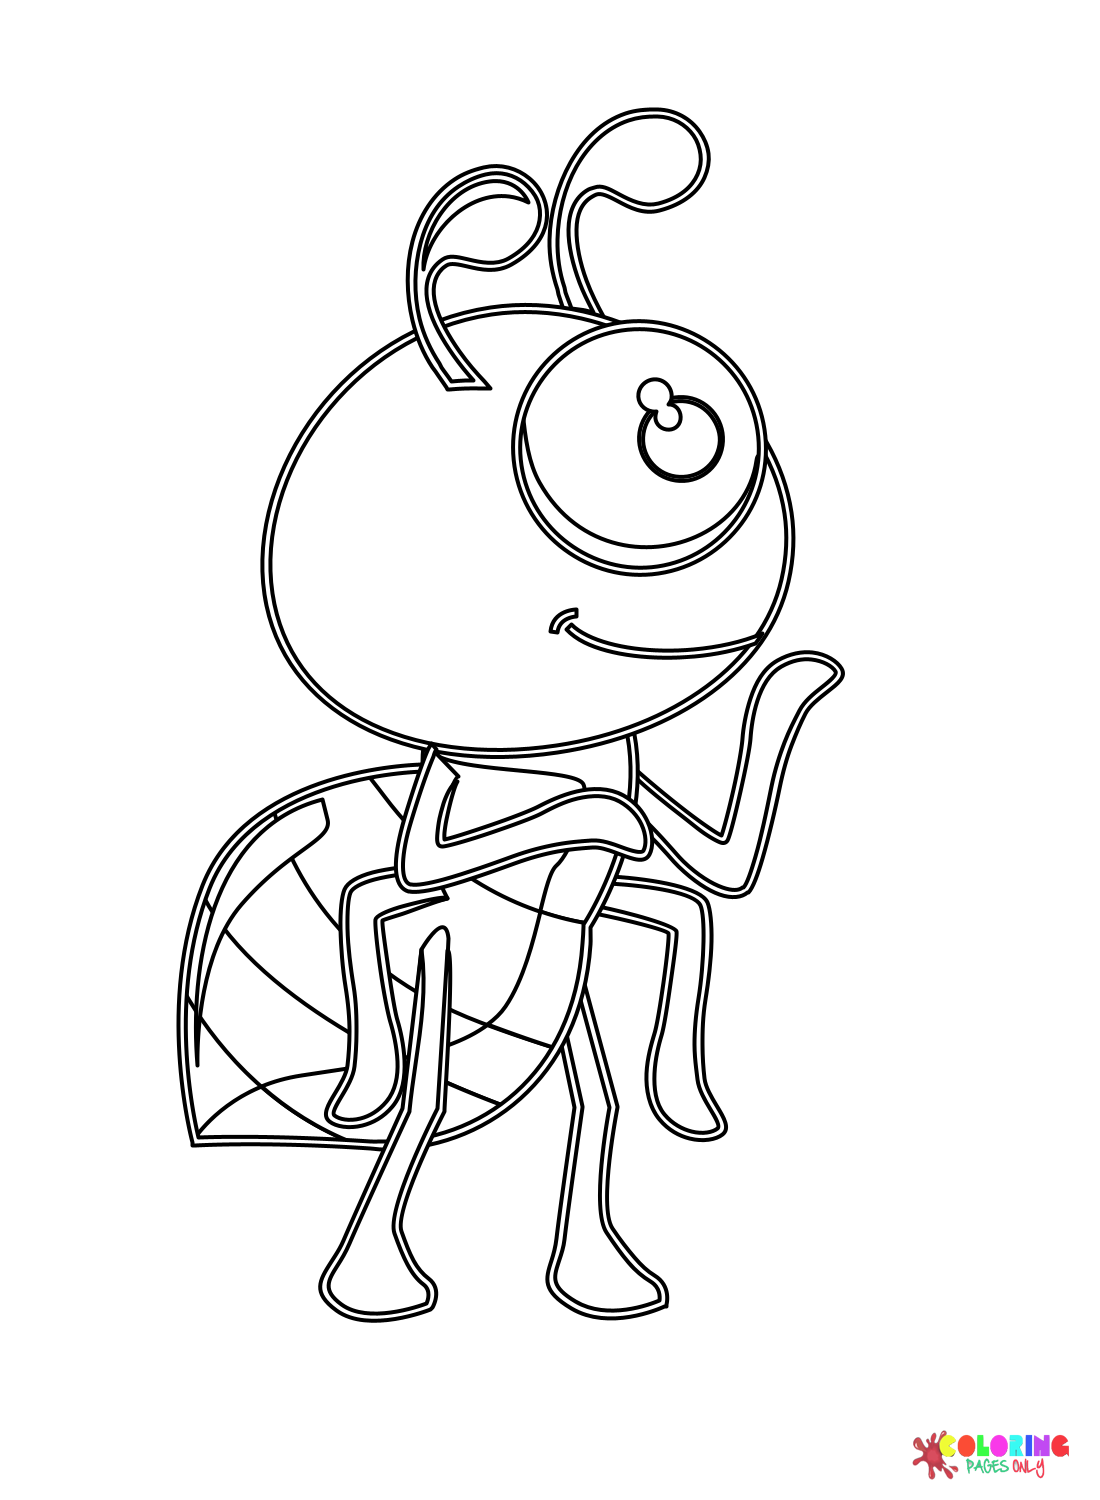 Cute Ant Coloring Page